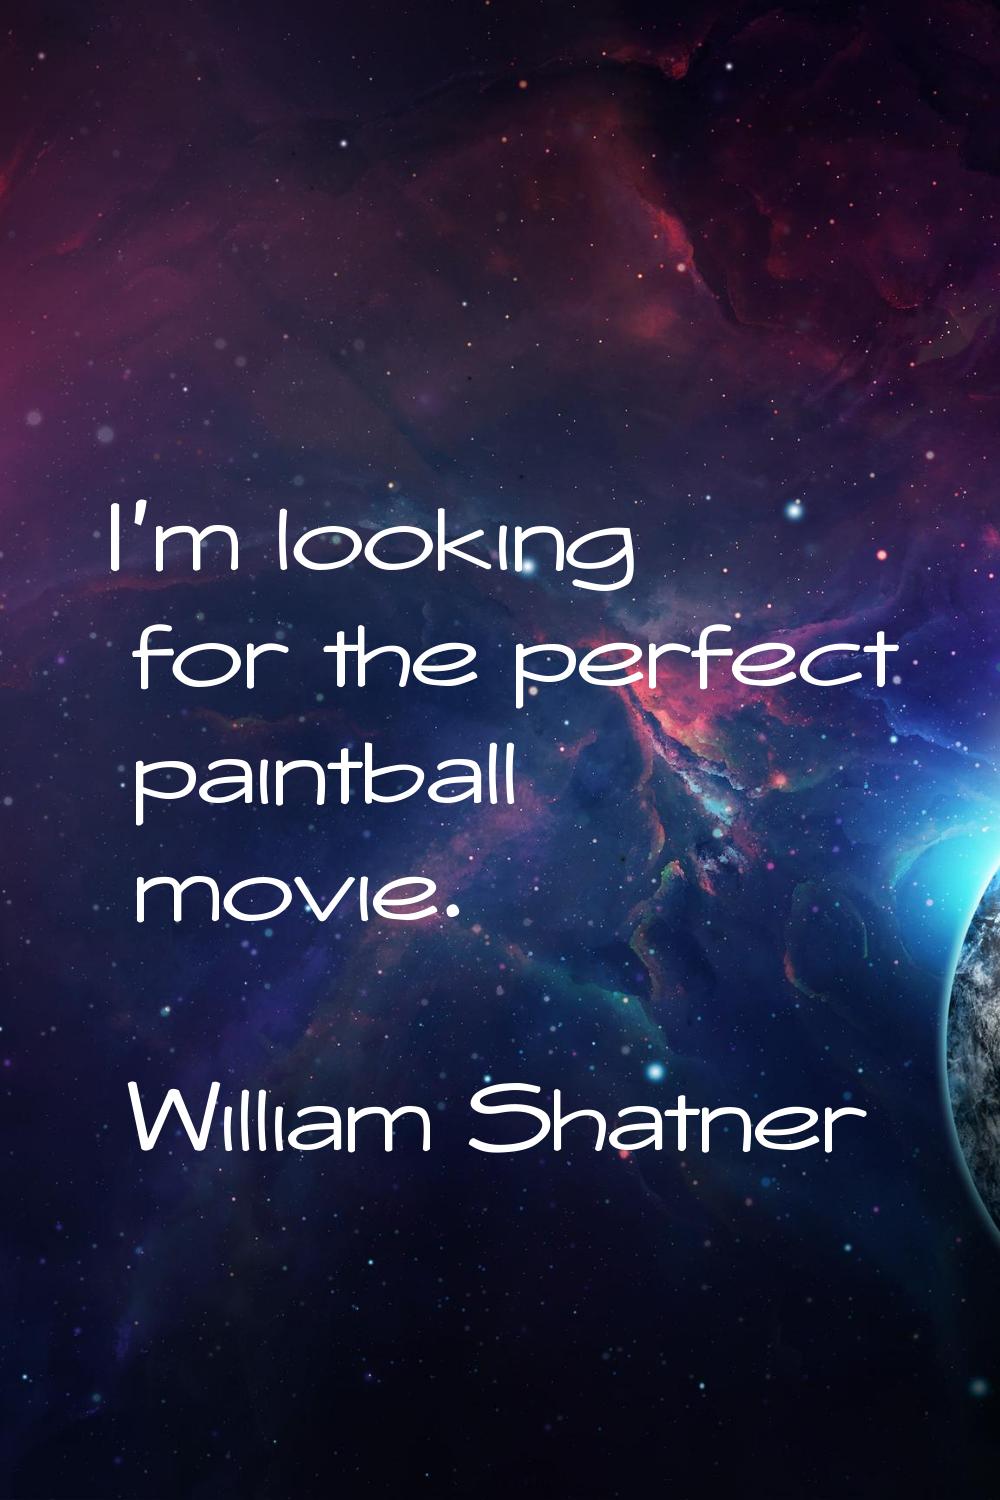 I'm looking for the perfect paintball movie.